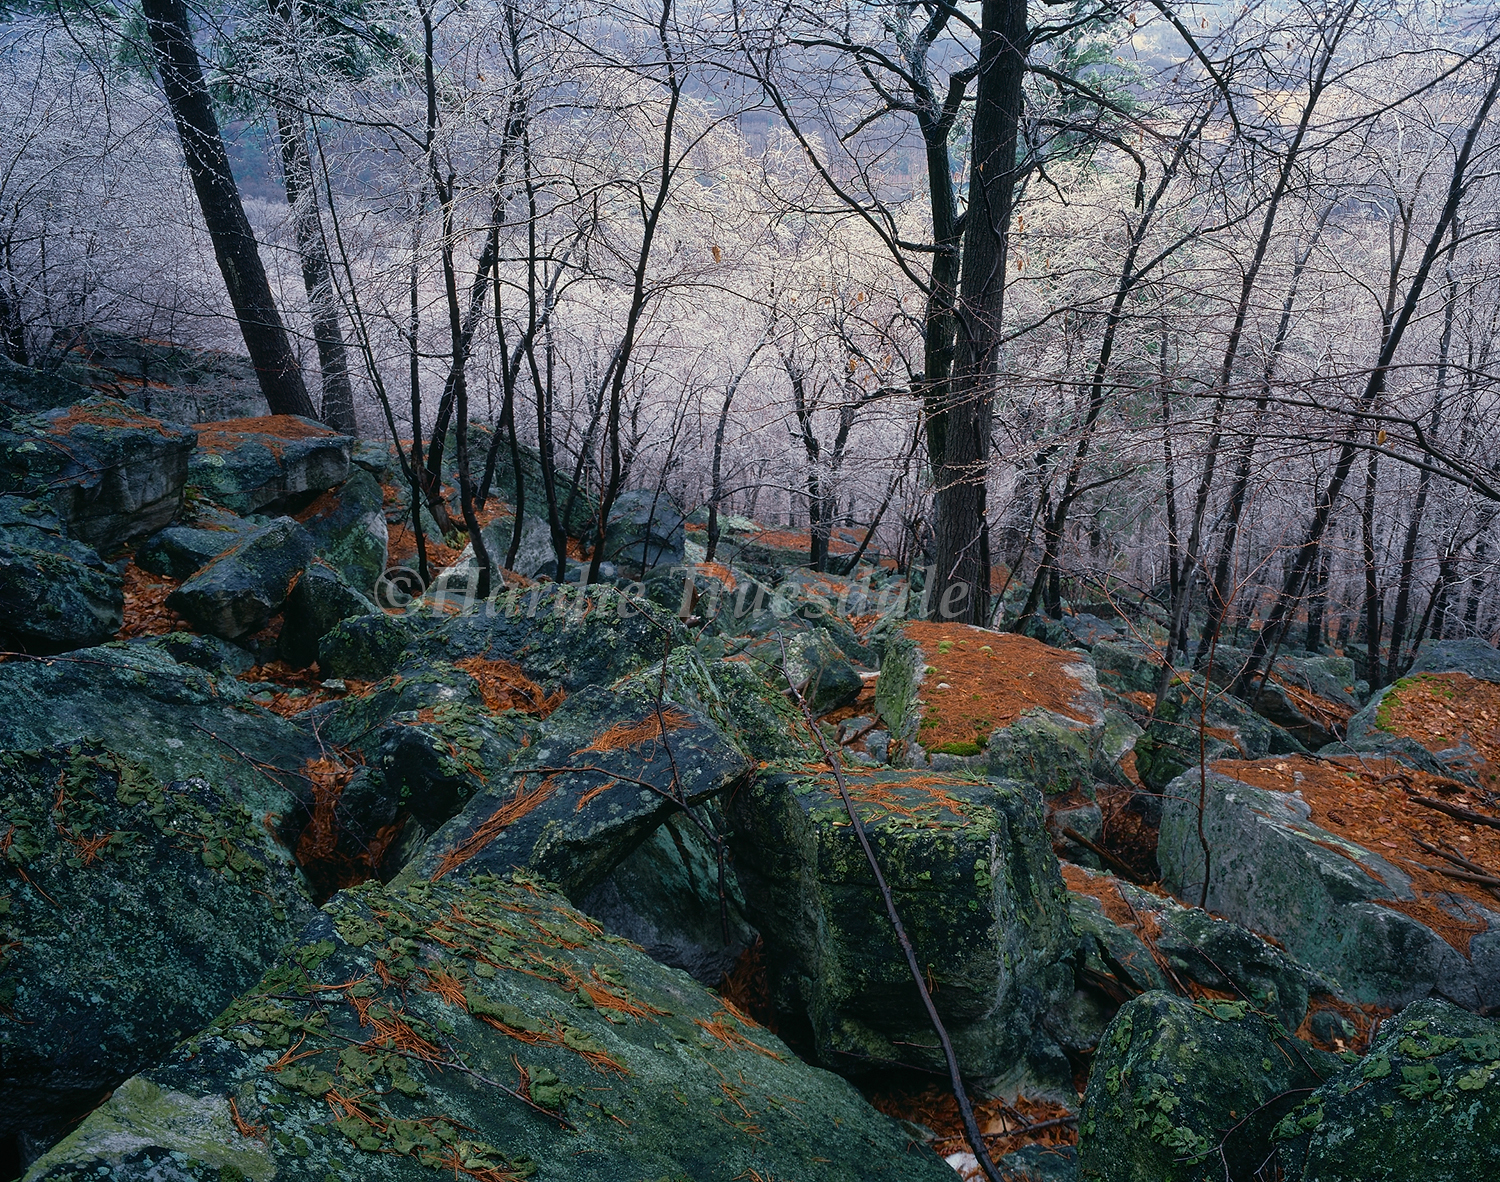  Gks#002 "Green Talus Ice Storm, Mohonk Preserve" 